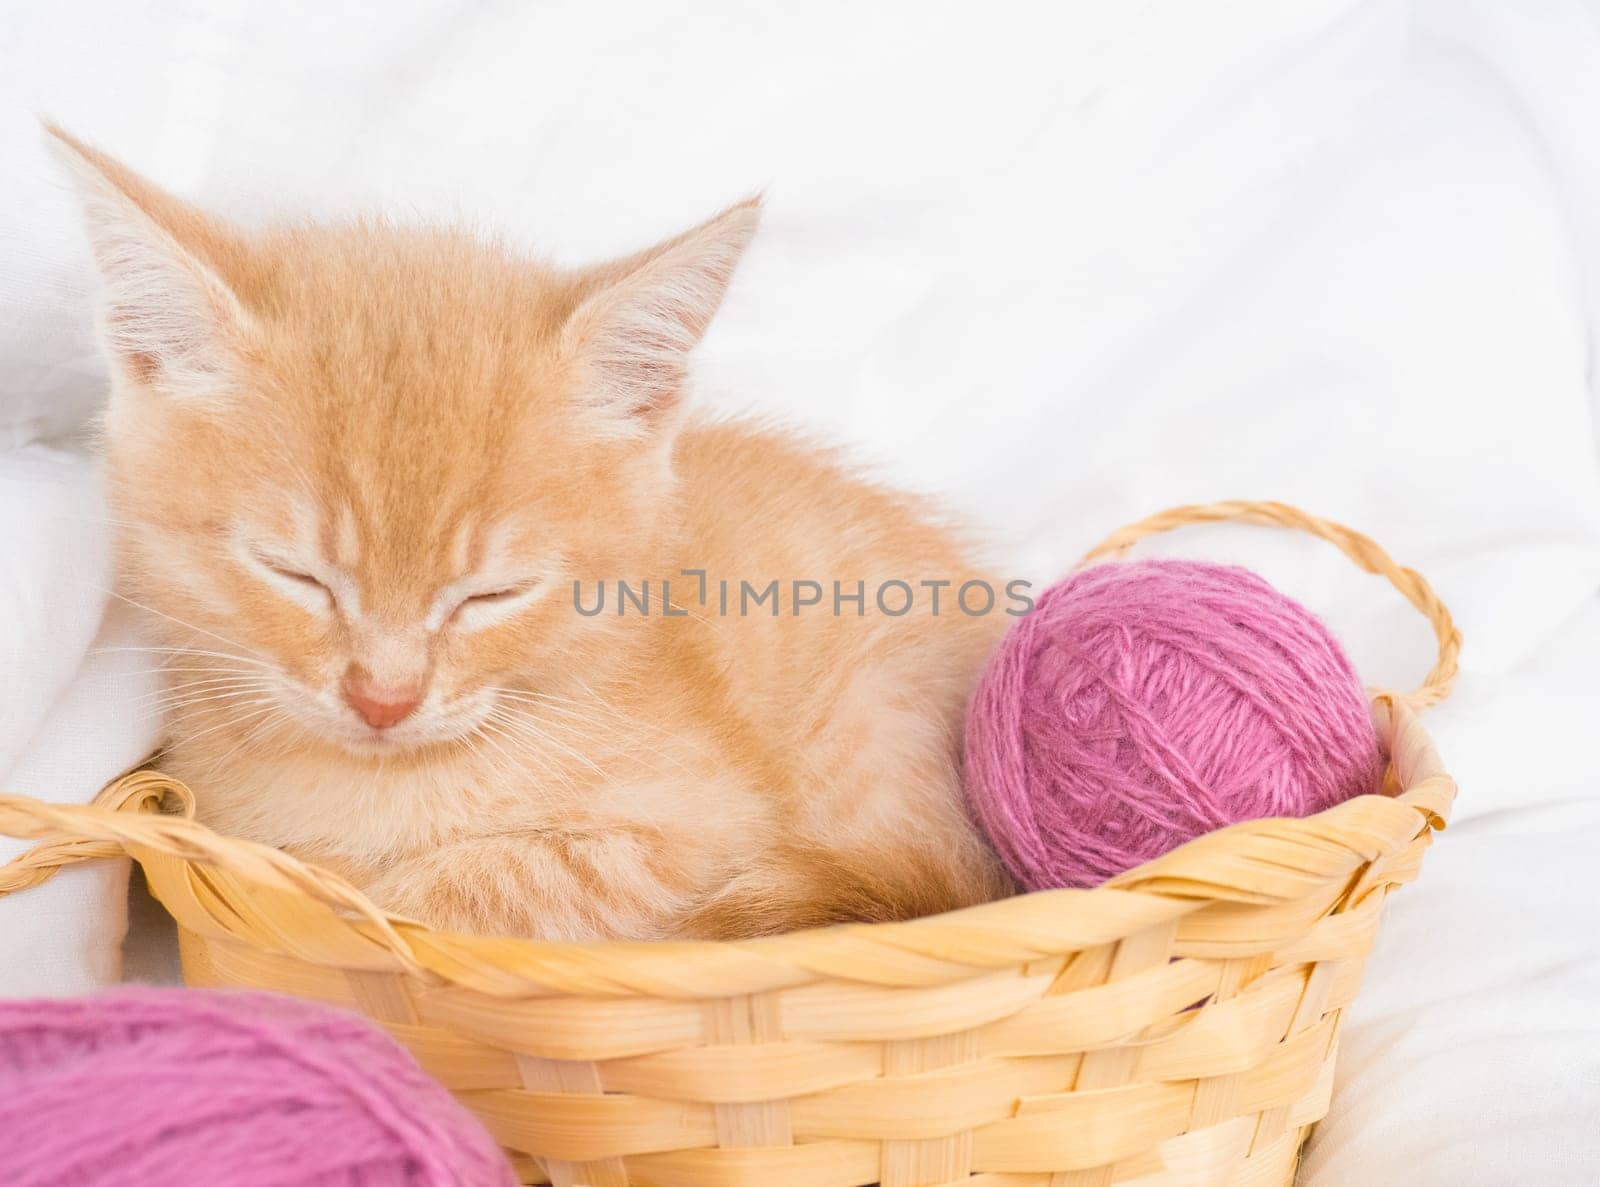 Ginger kitten sleeps in a straw basket with pink balls, skeins of thread on a white bed